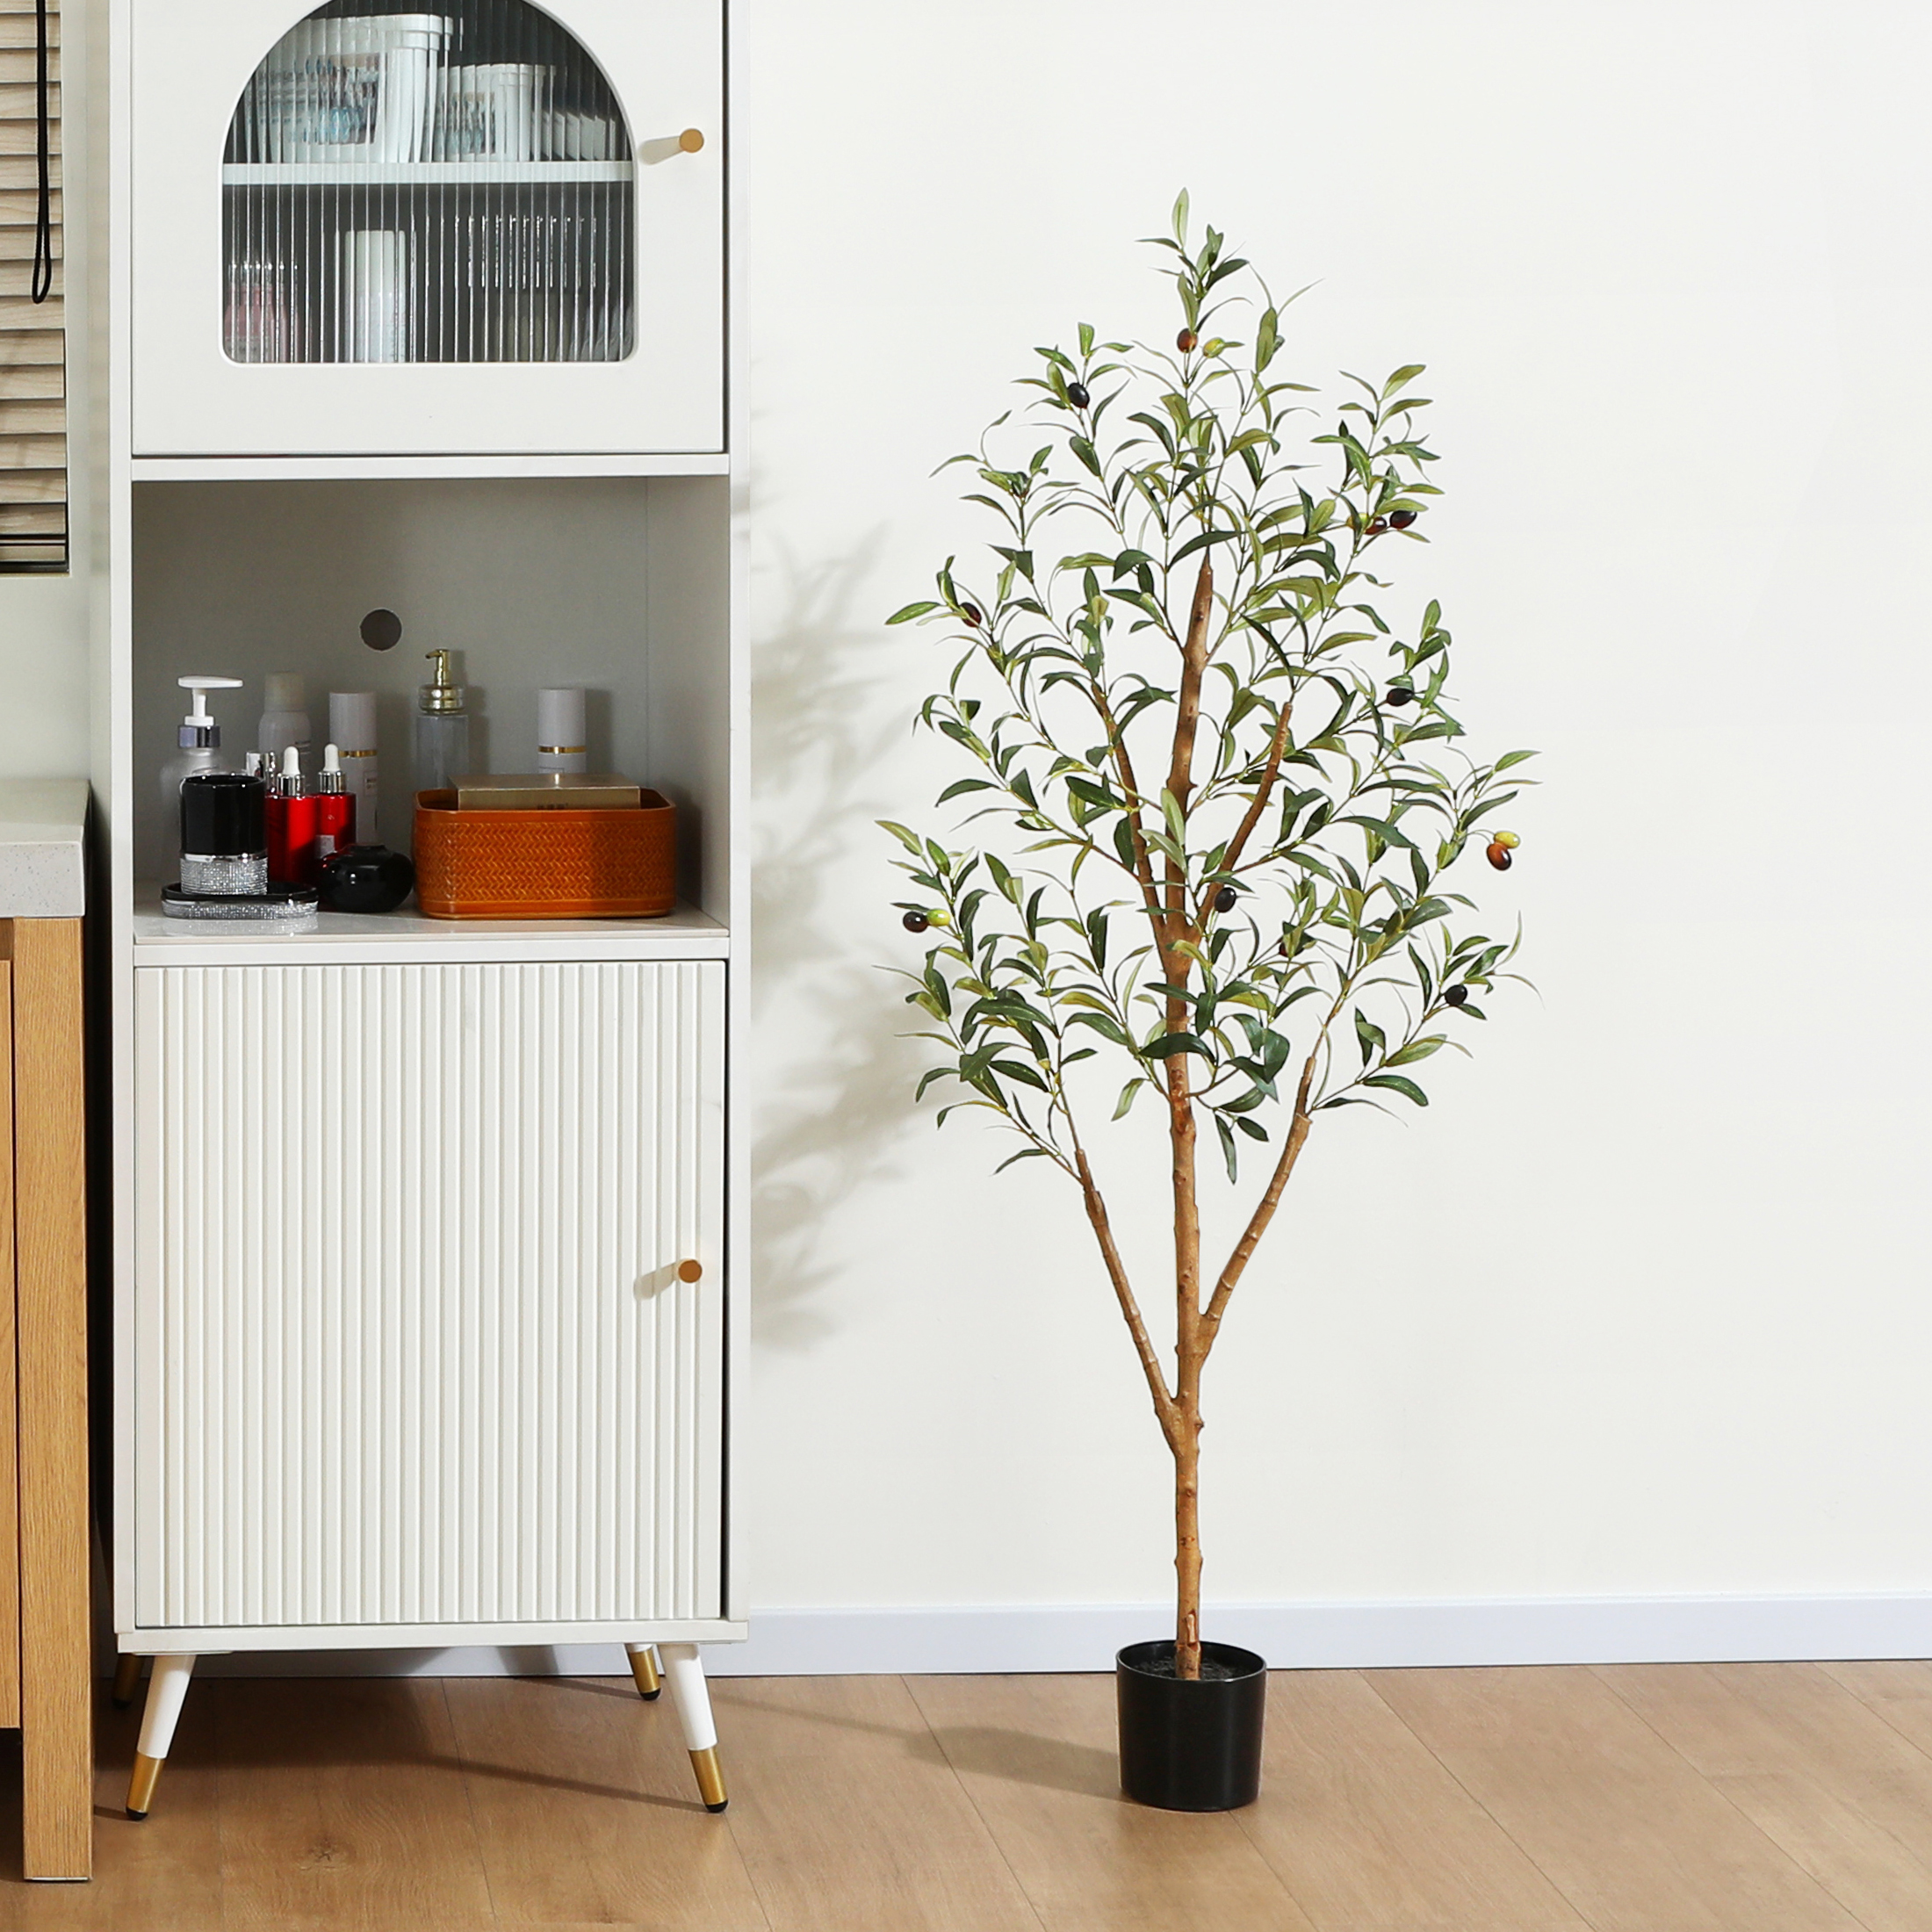 4 ft Artificial Olive Plants with Realistic Leaves and Natural Trunk, Silk Fake Potted Tree with Wood Branches and Fruits, Faux Olive Tree for Office Home - image 1 of 8